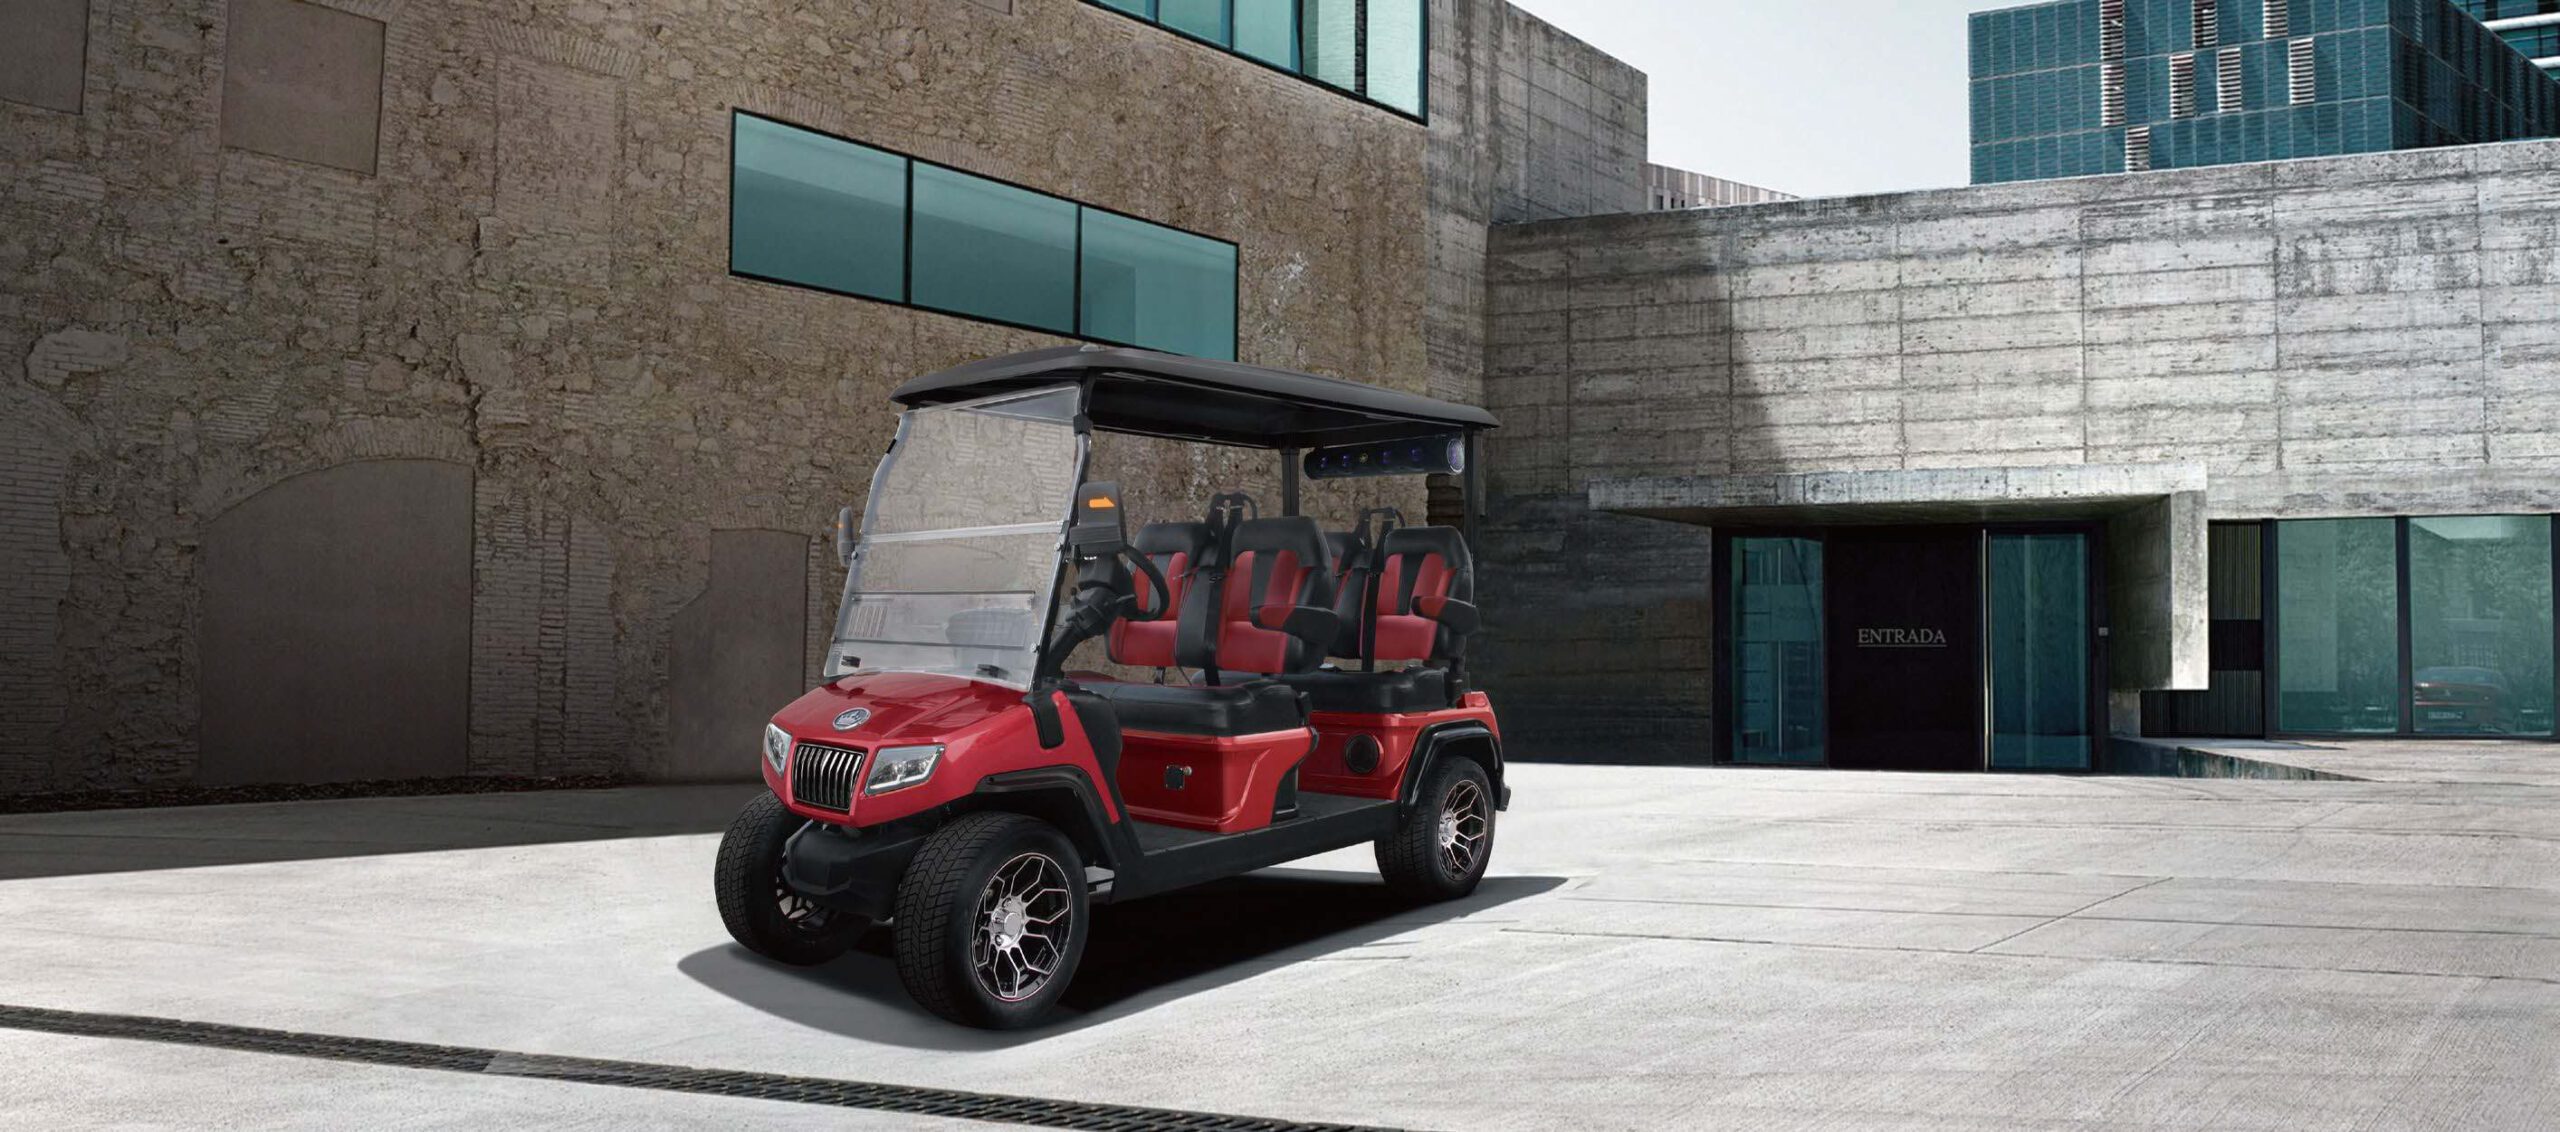 Golf Cart Review – Why Street-Legal Golf Carts are taking over!